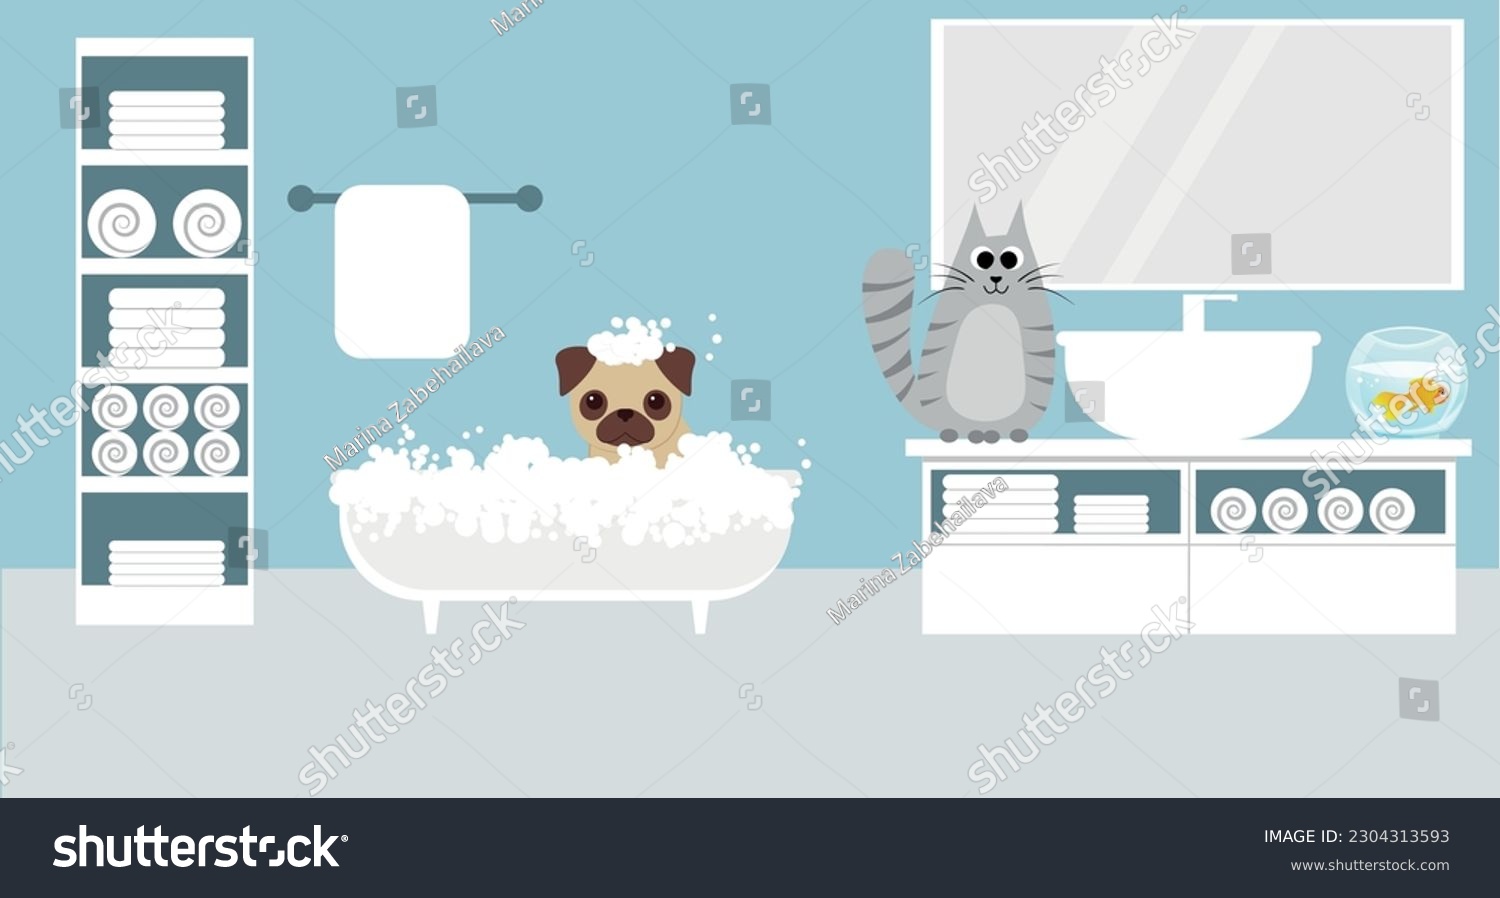 SVG of pug takes a bubble bath. the puppy is bathing in a white bathtub, the cat is sitting near the sink, the aquarium is in the bathroom. svg